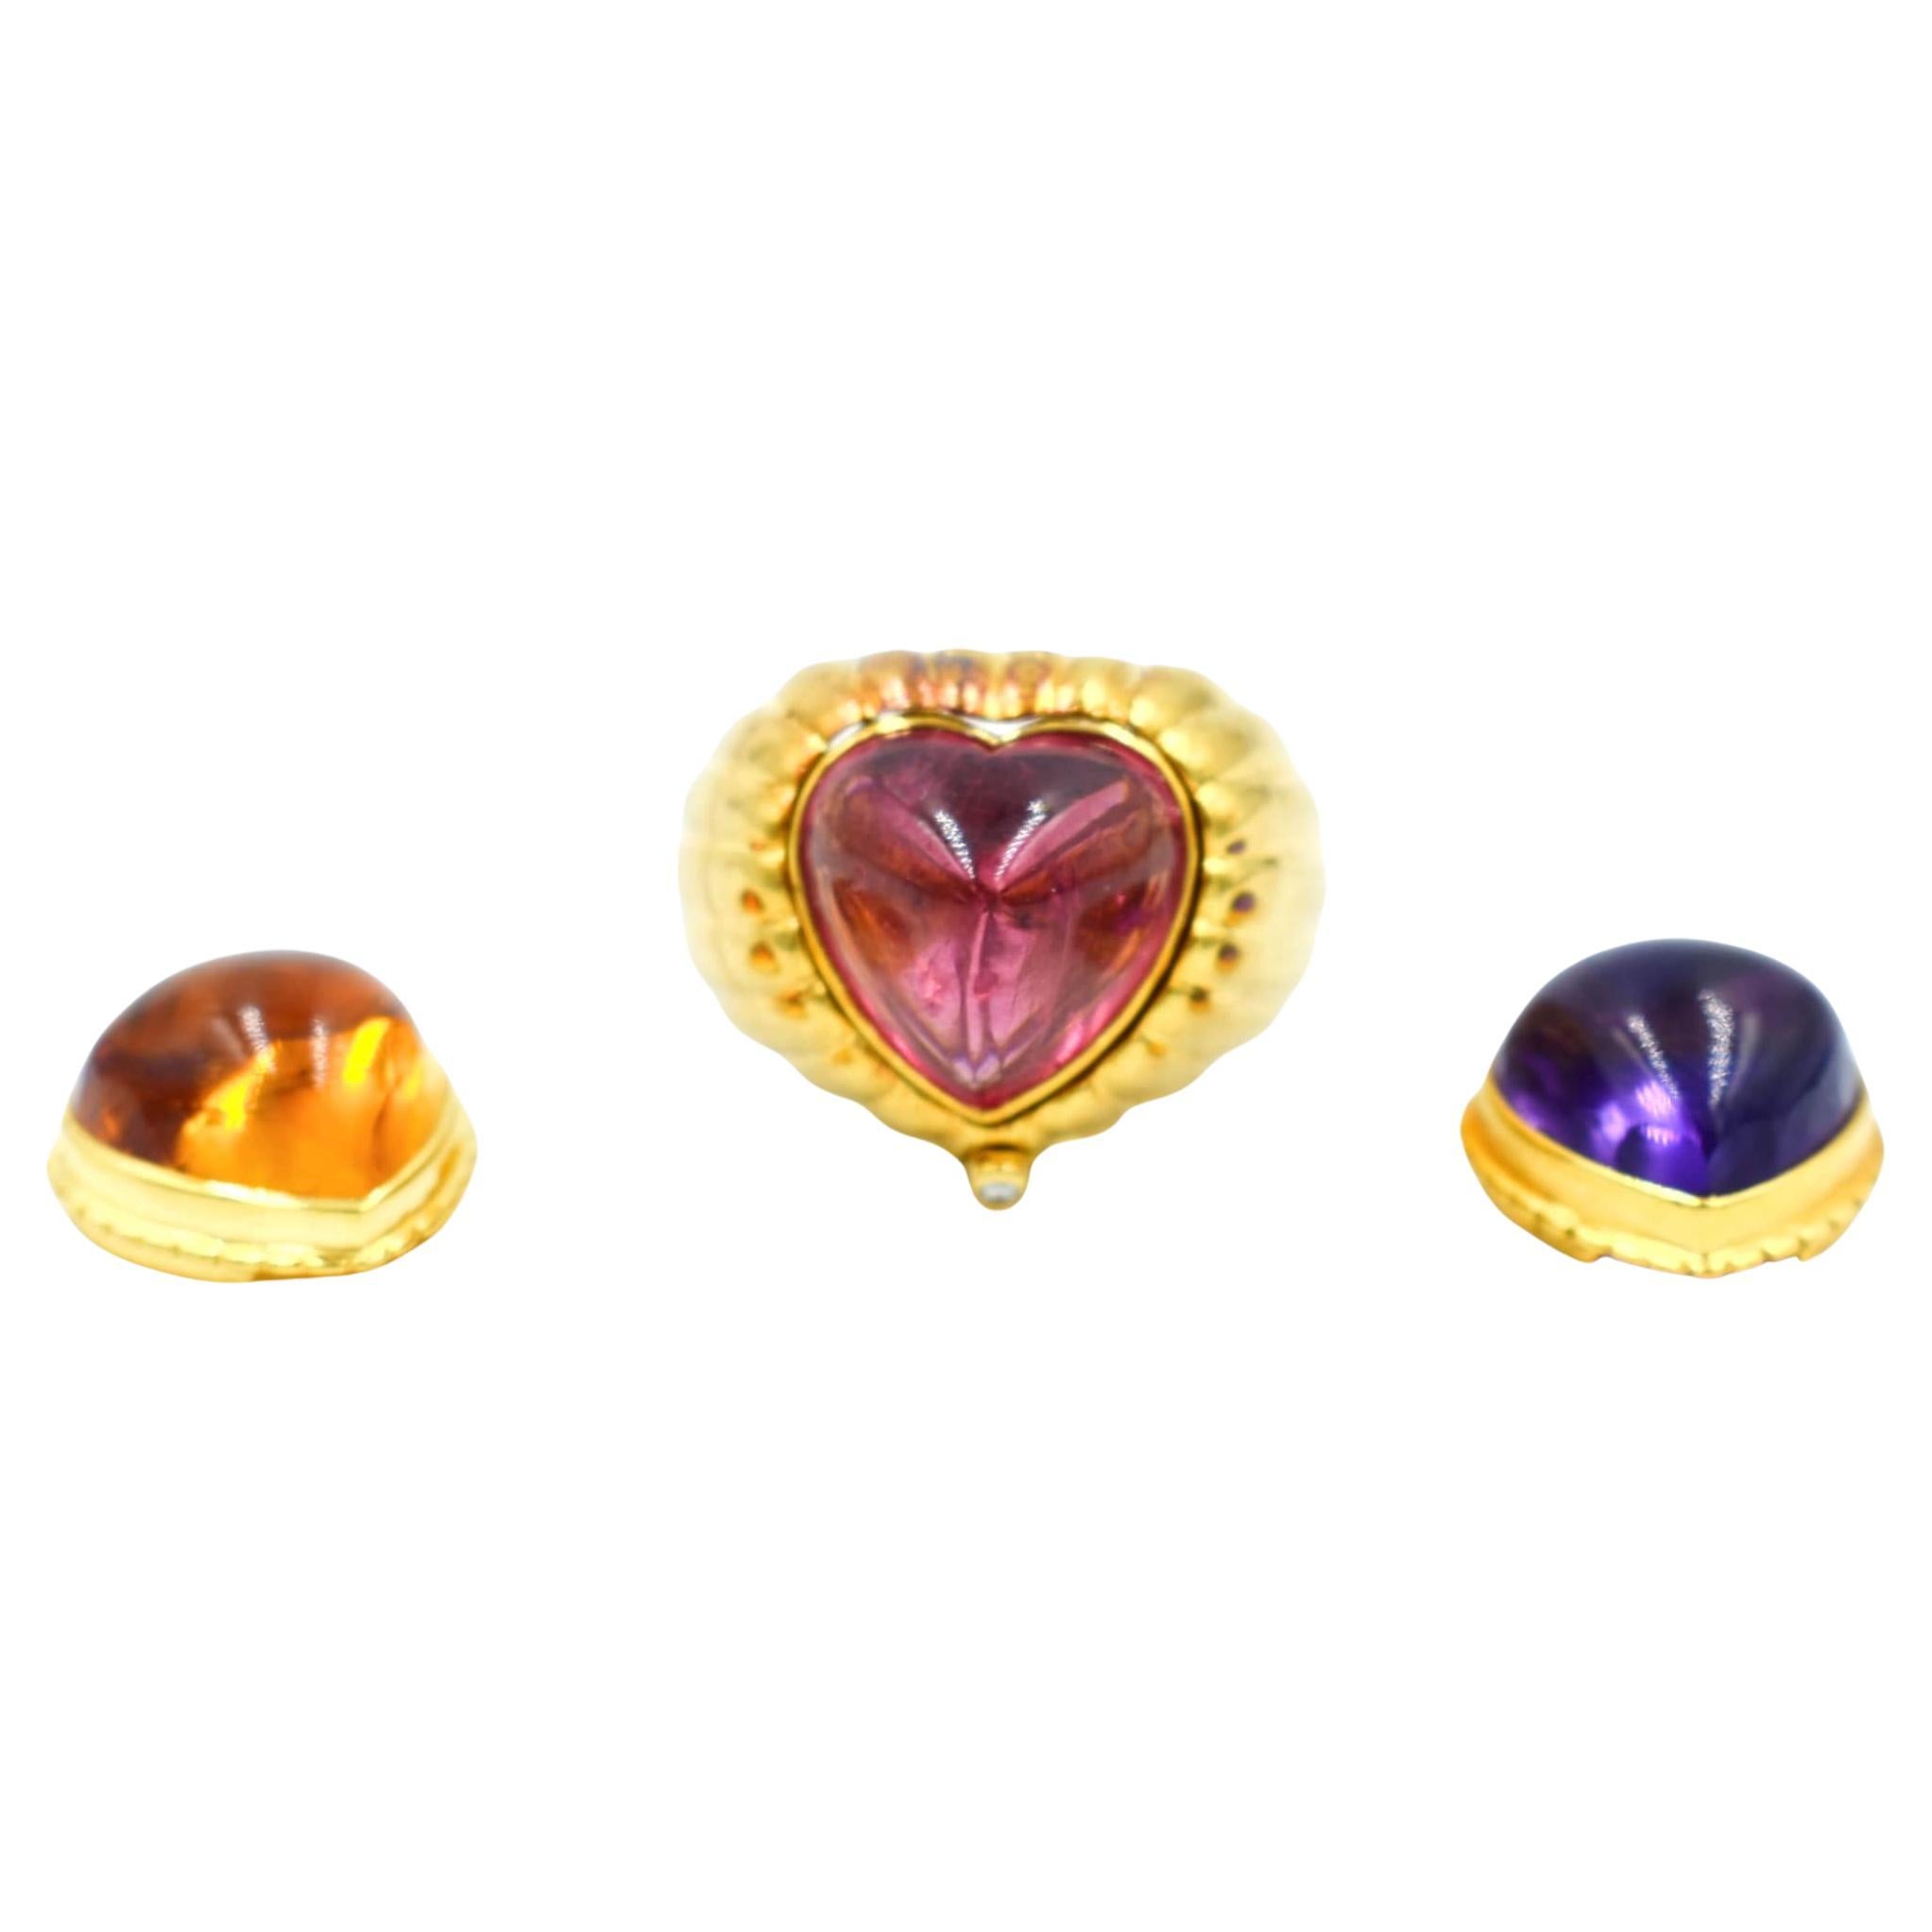 Modular 3-in-1 Heart Ring in Gold with Amethyst, Citrine, Tourmaline Cabochons For Sale